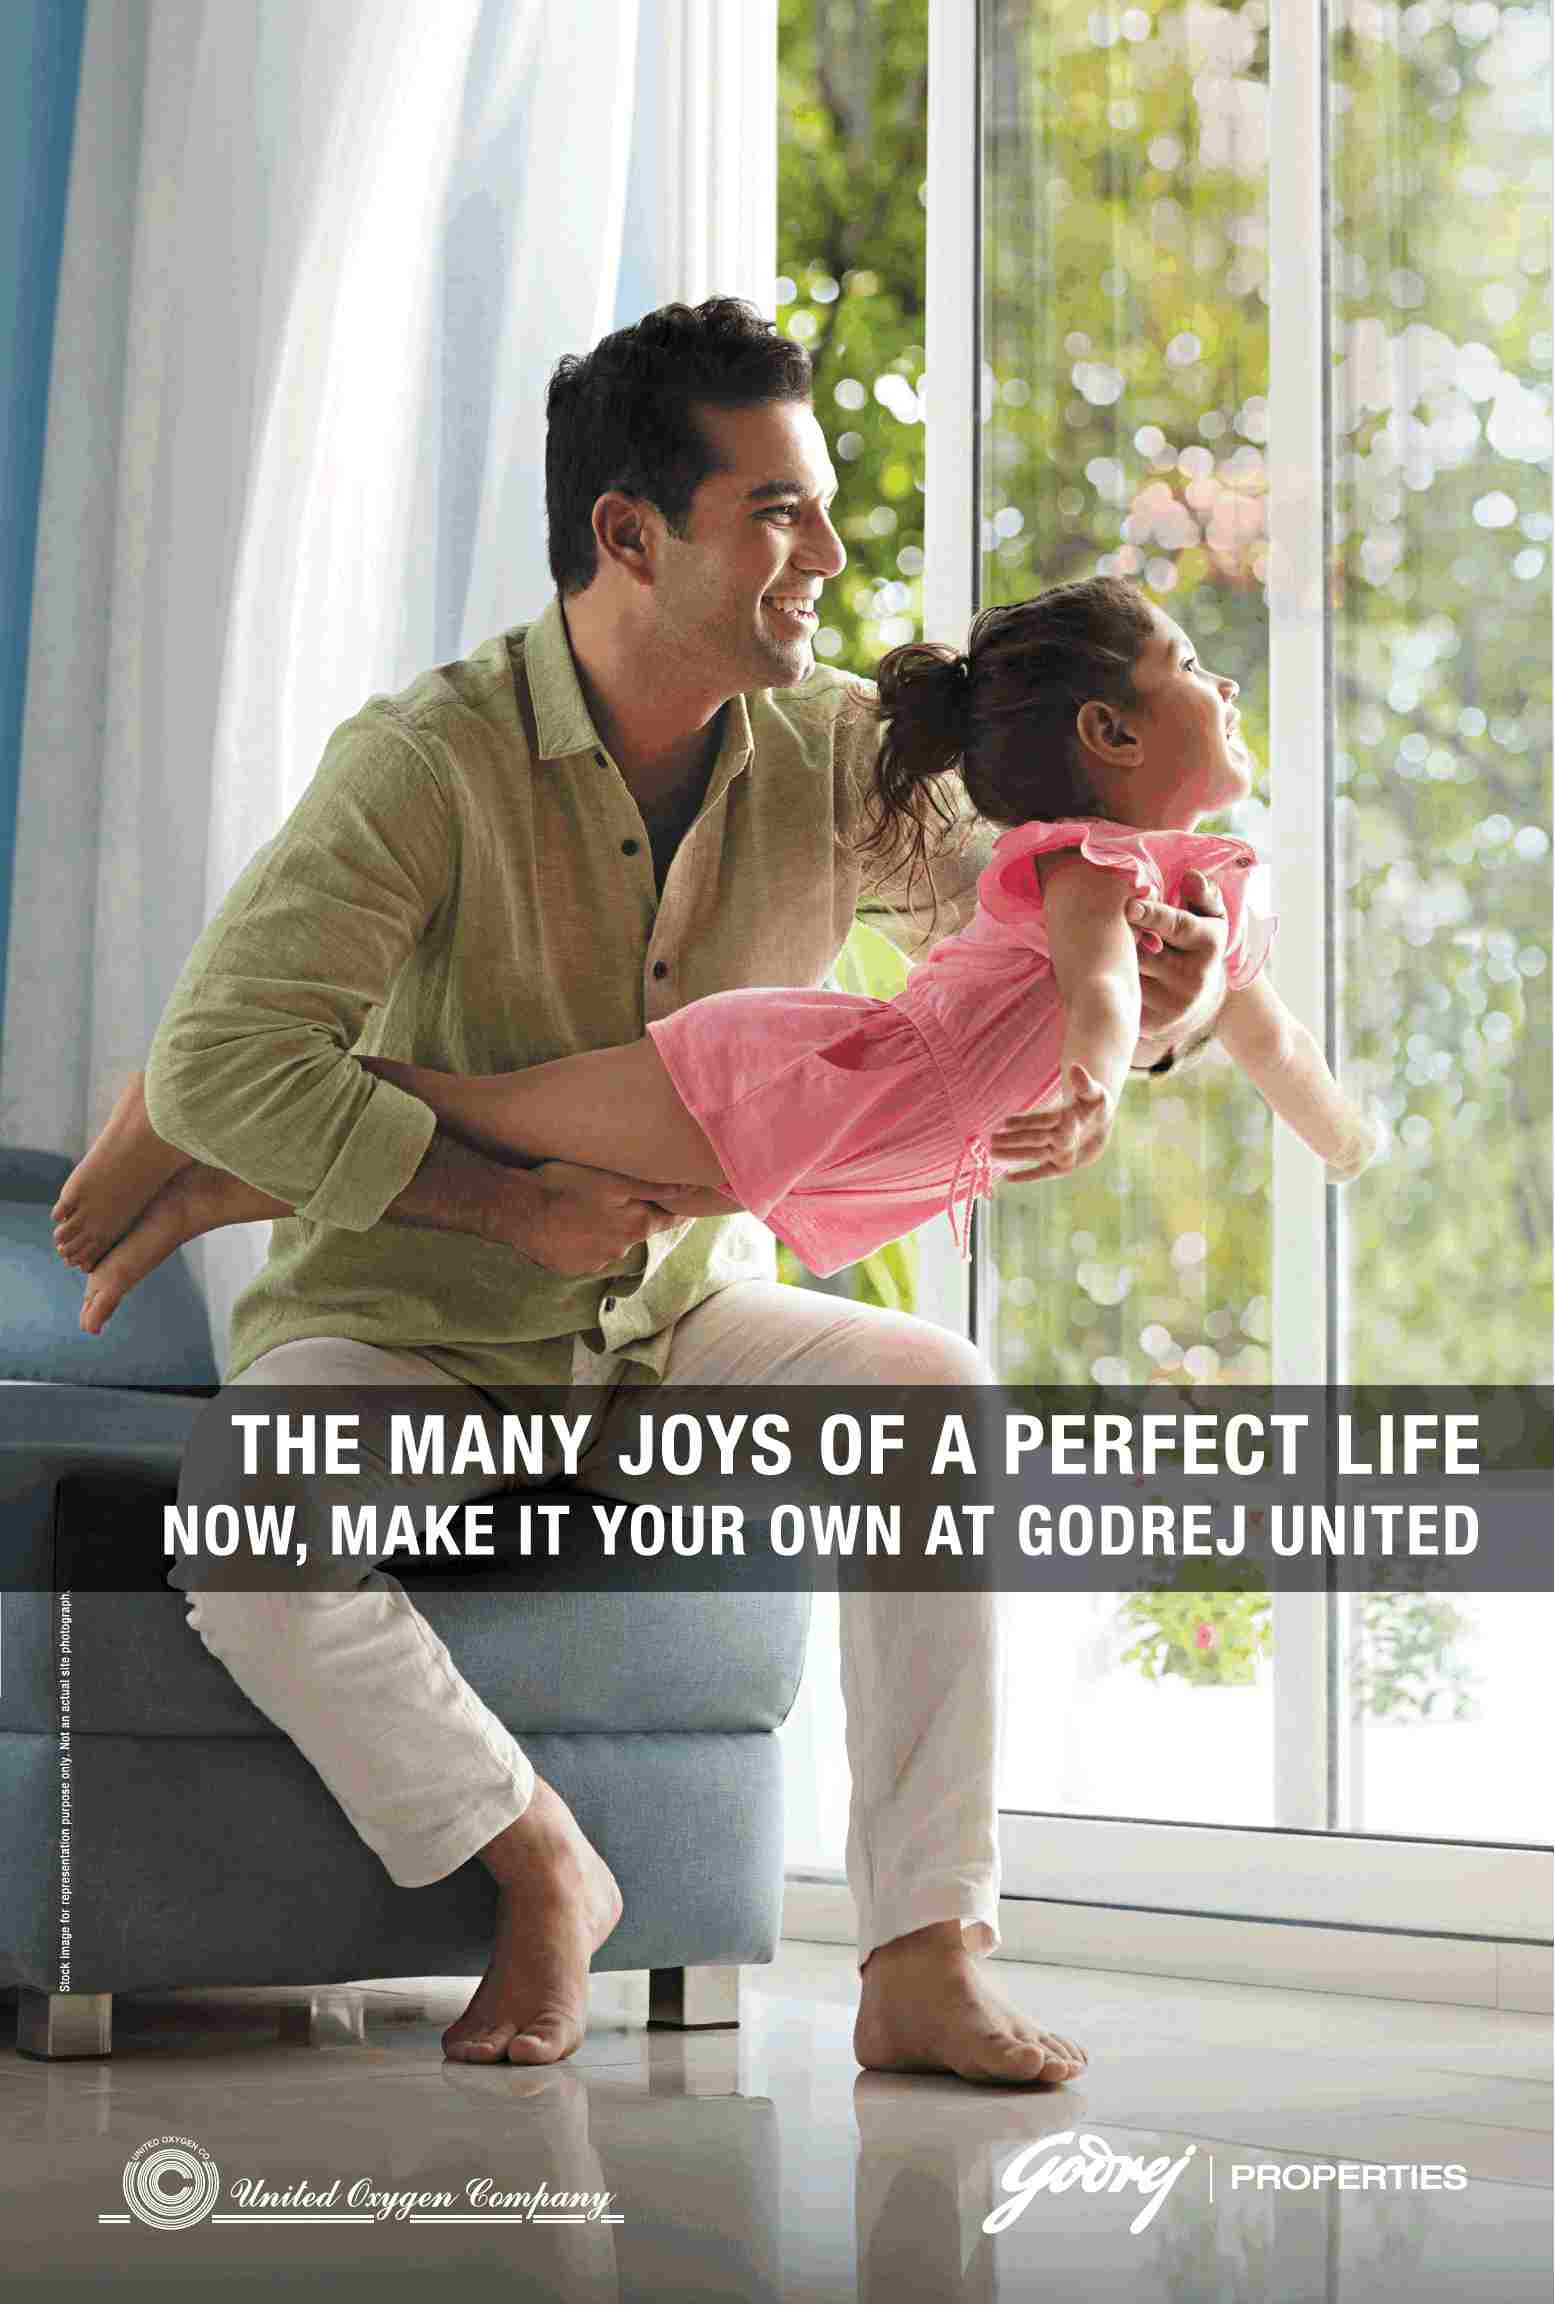 Experience the many joys of perfect life at Godrej United in Bangalore Update